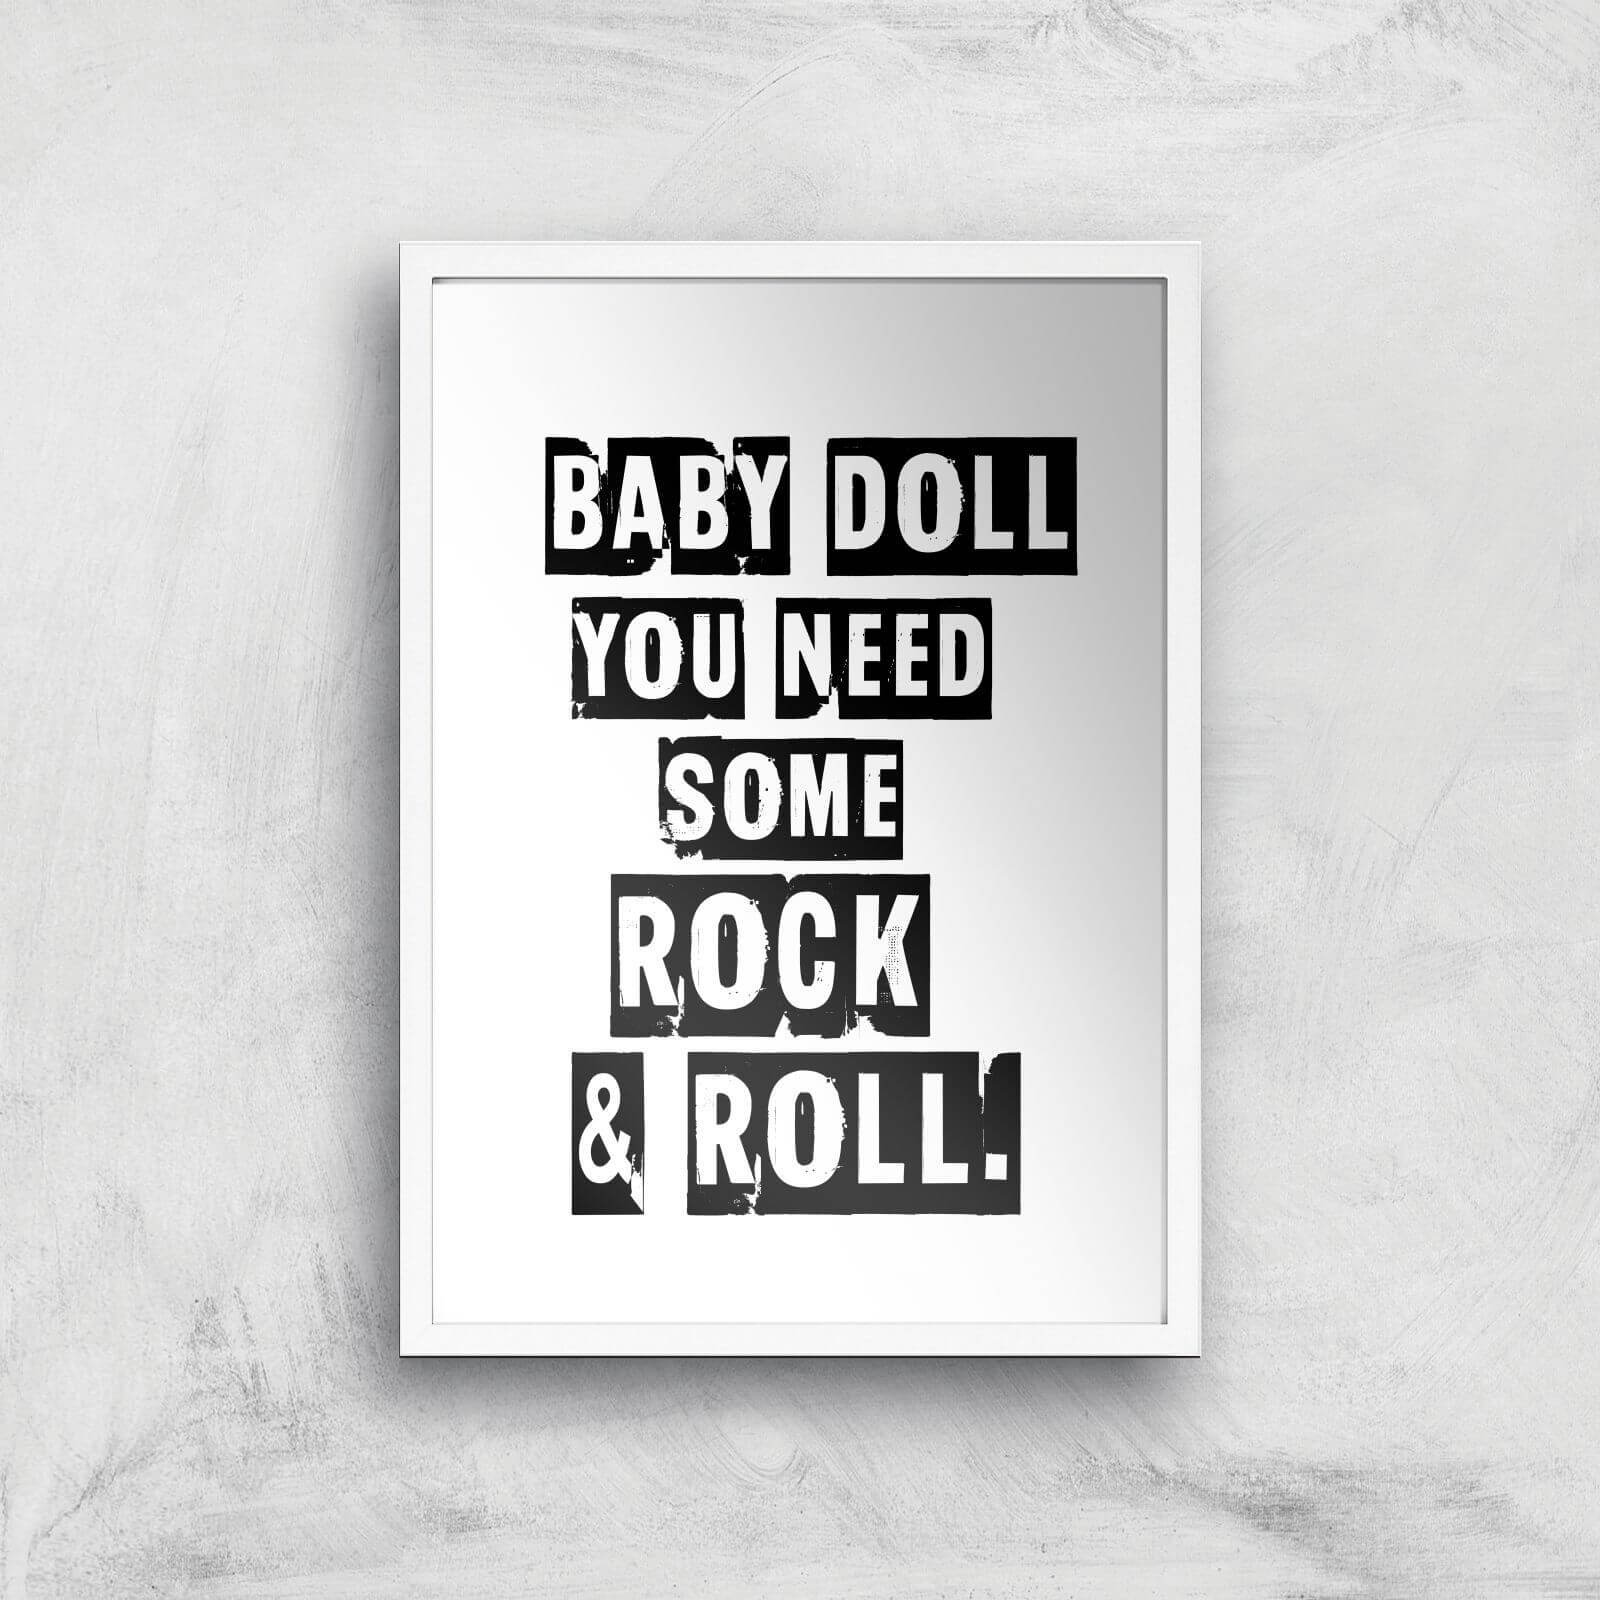 Baby Doll You Need Some Rock & Roll Giclee Art Print - A2 - White Frame